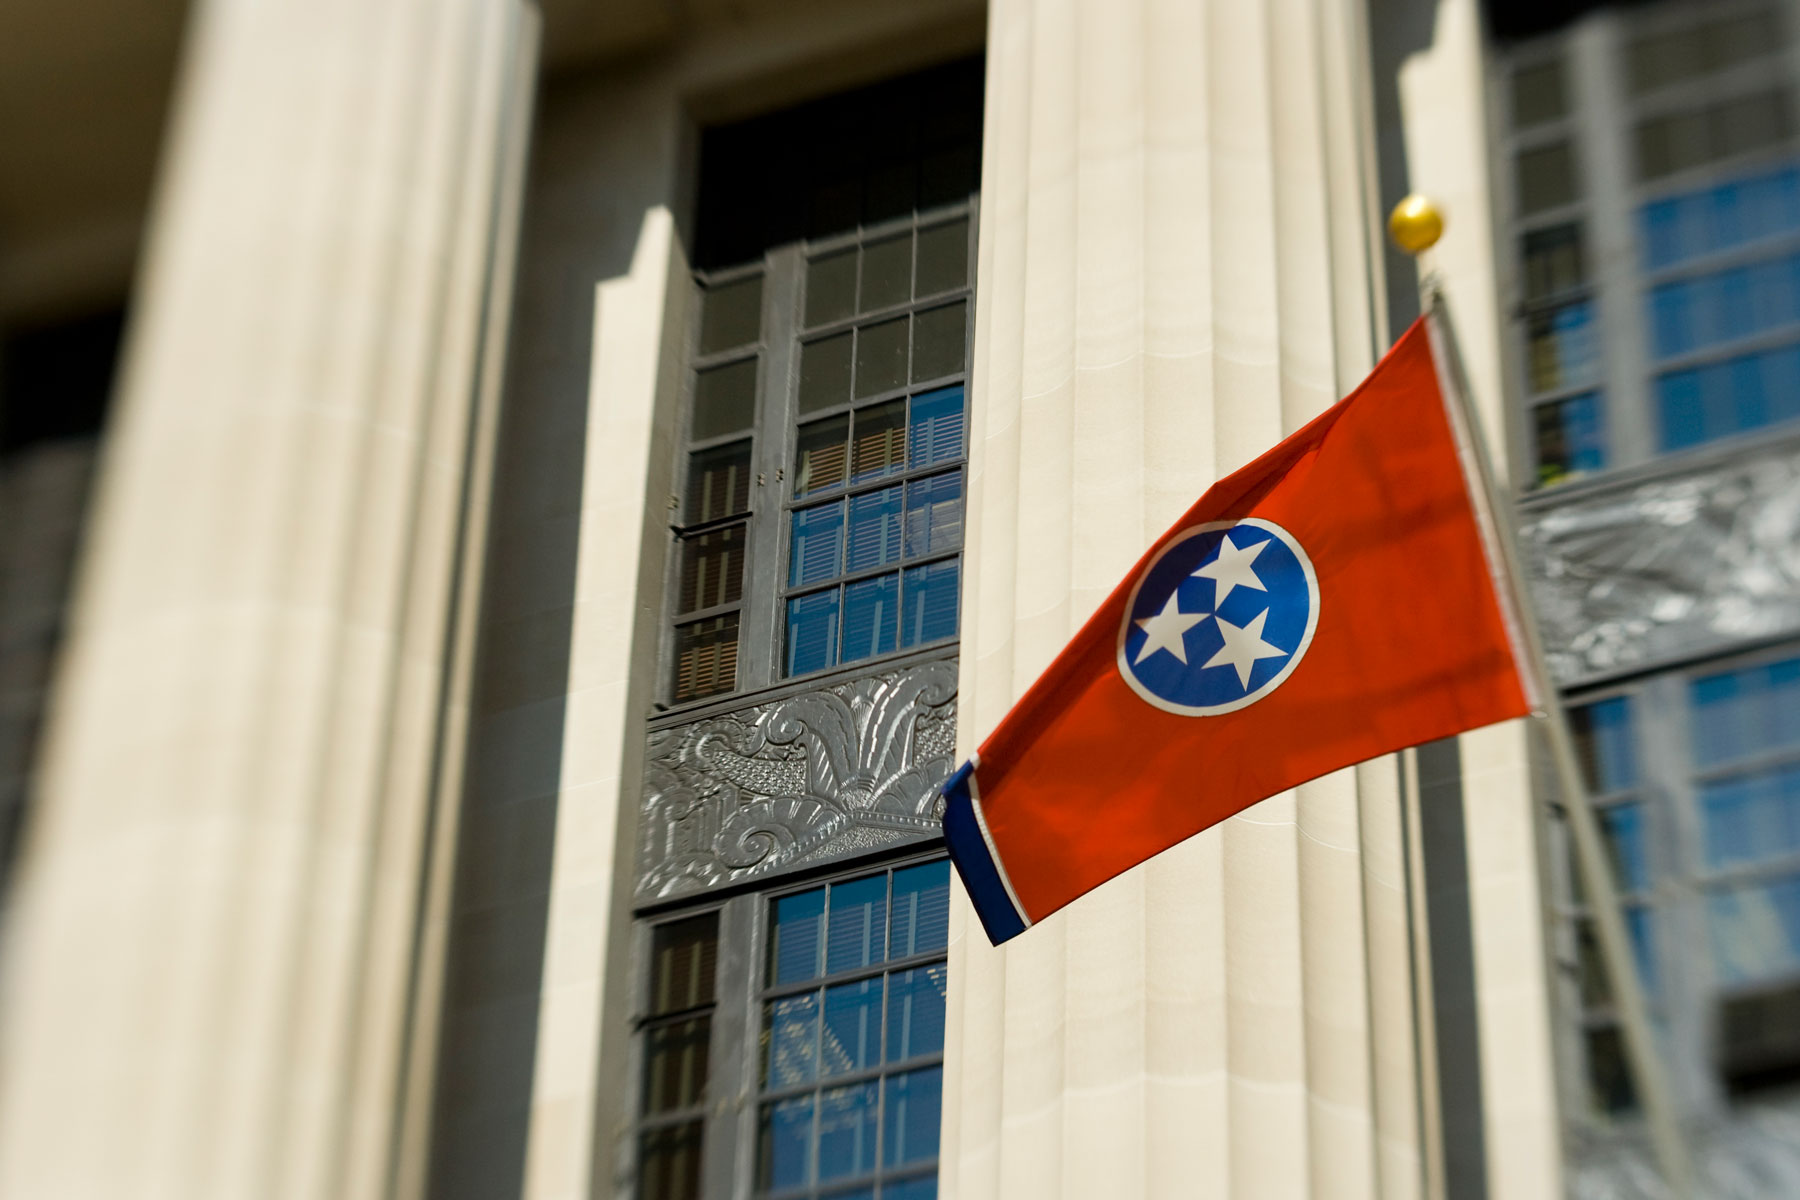 Tennessee state flag in front of government building